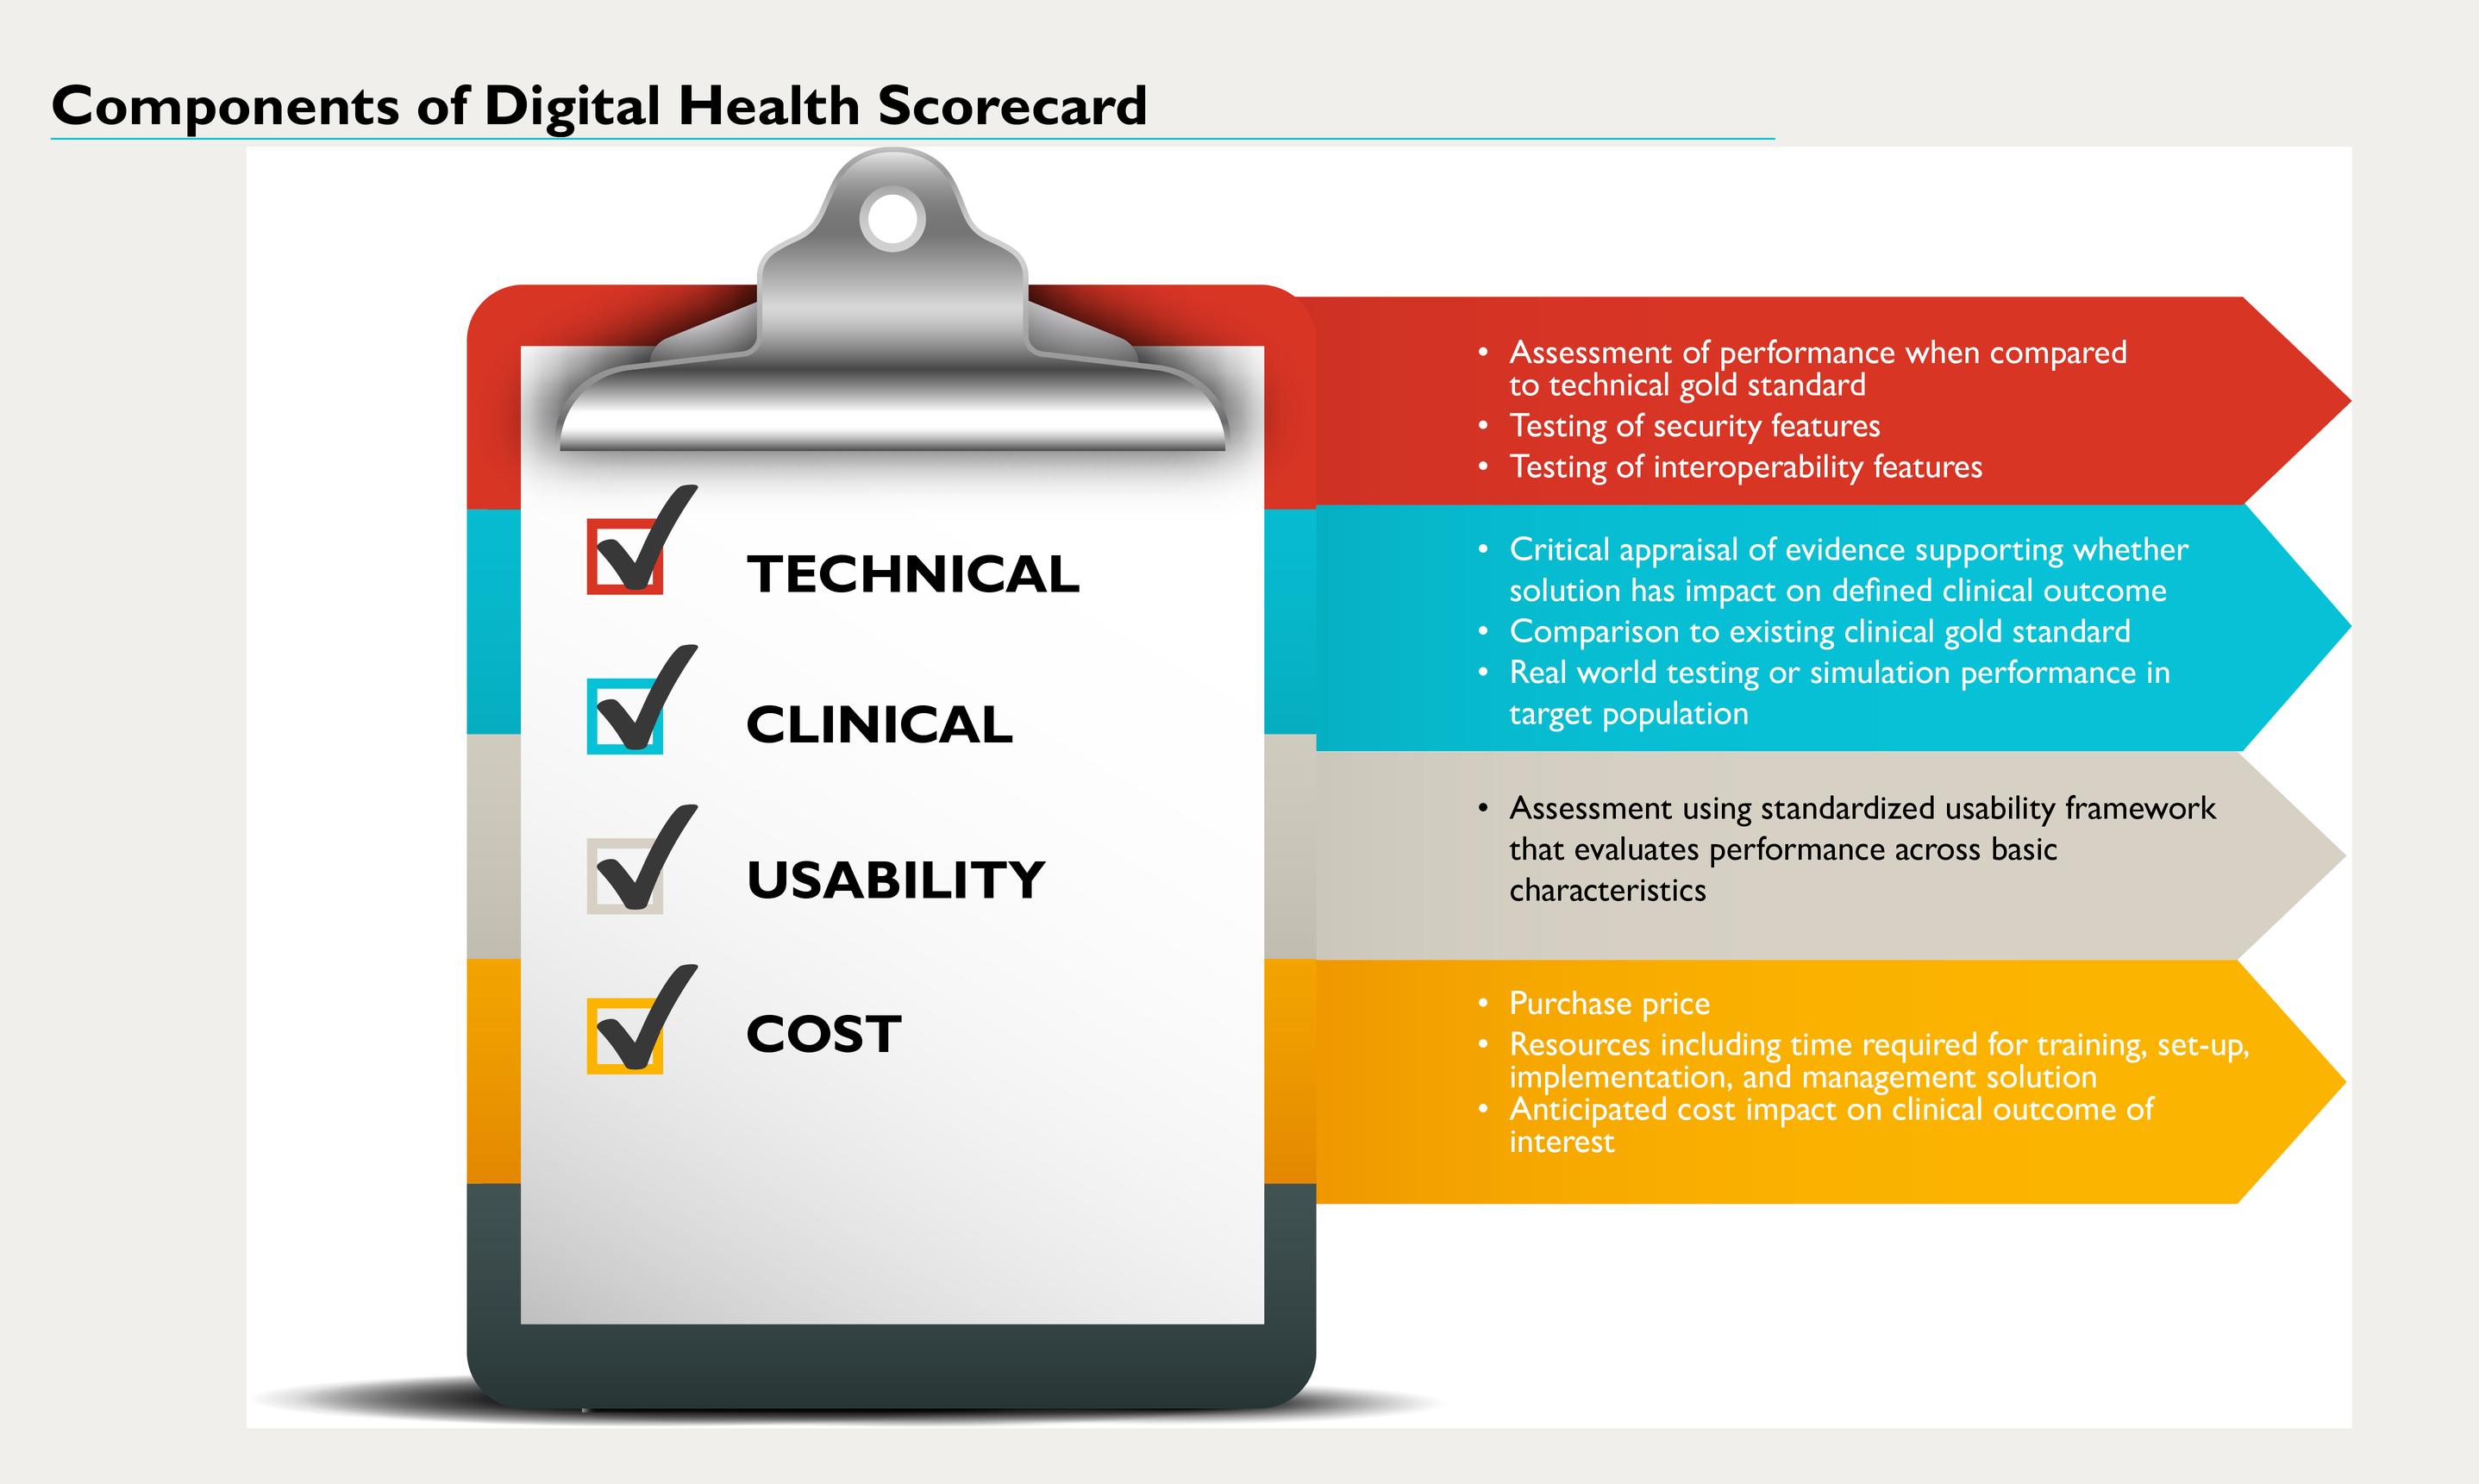 The scorecard shows the criteria for assessing a health-related app